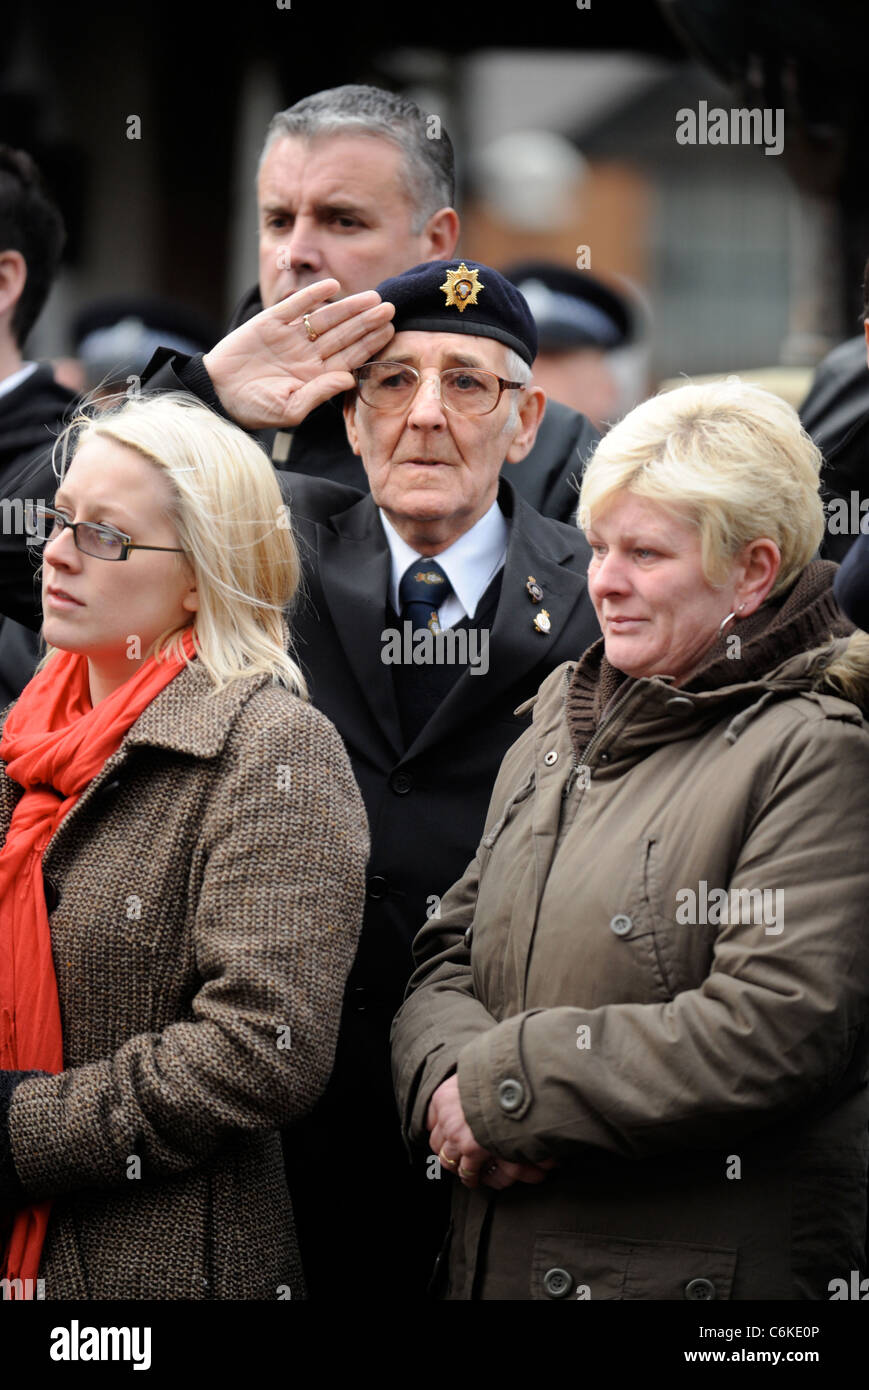 An army veteran in uniform amongst mourners gathered for a repatriation ceremony at Wootton Bassett, Wiltshire UK Dec 2008 Stock Photo